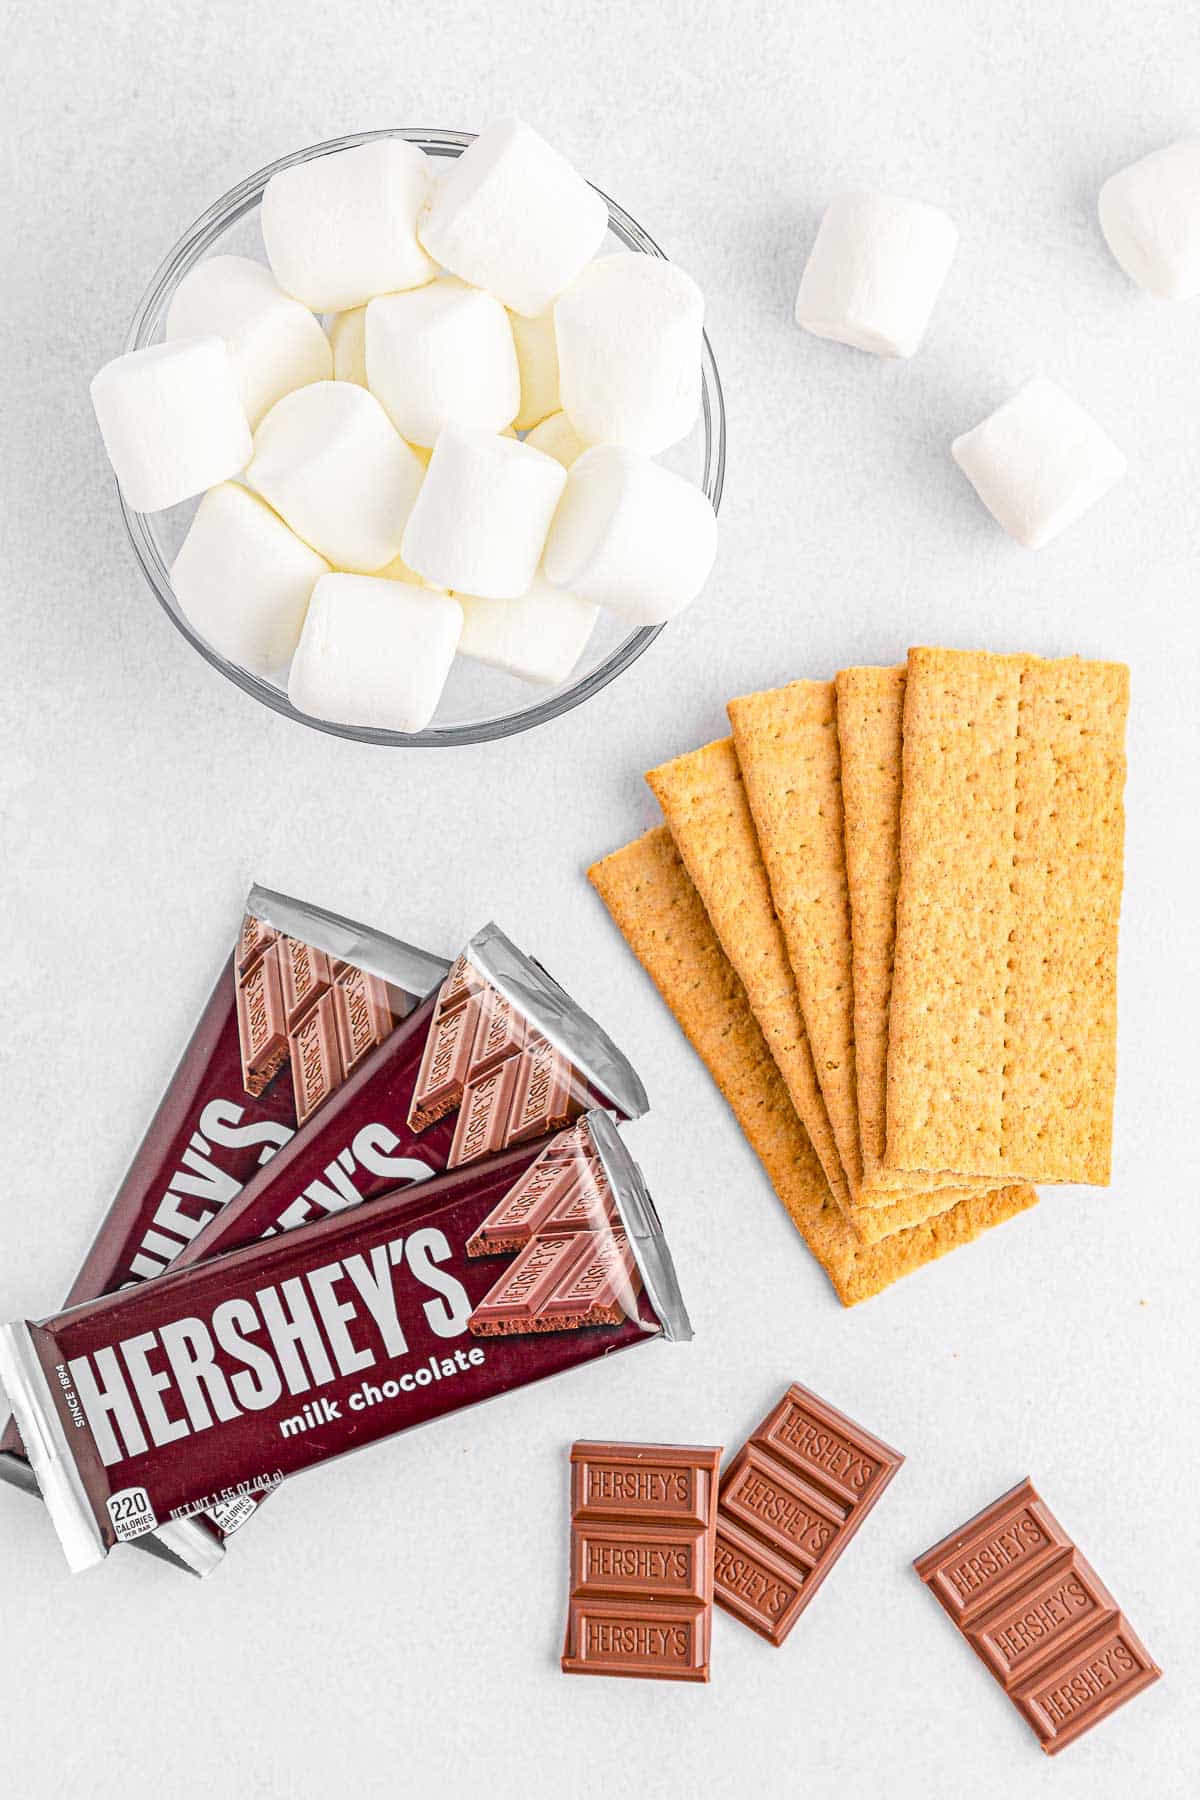 ingredients for air fryer s'mores - Marshmallows, chocolate bar, graham crackers.